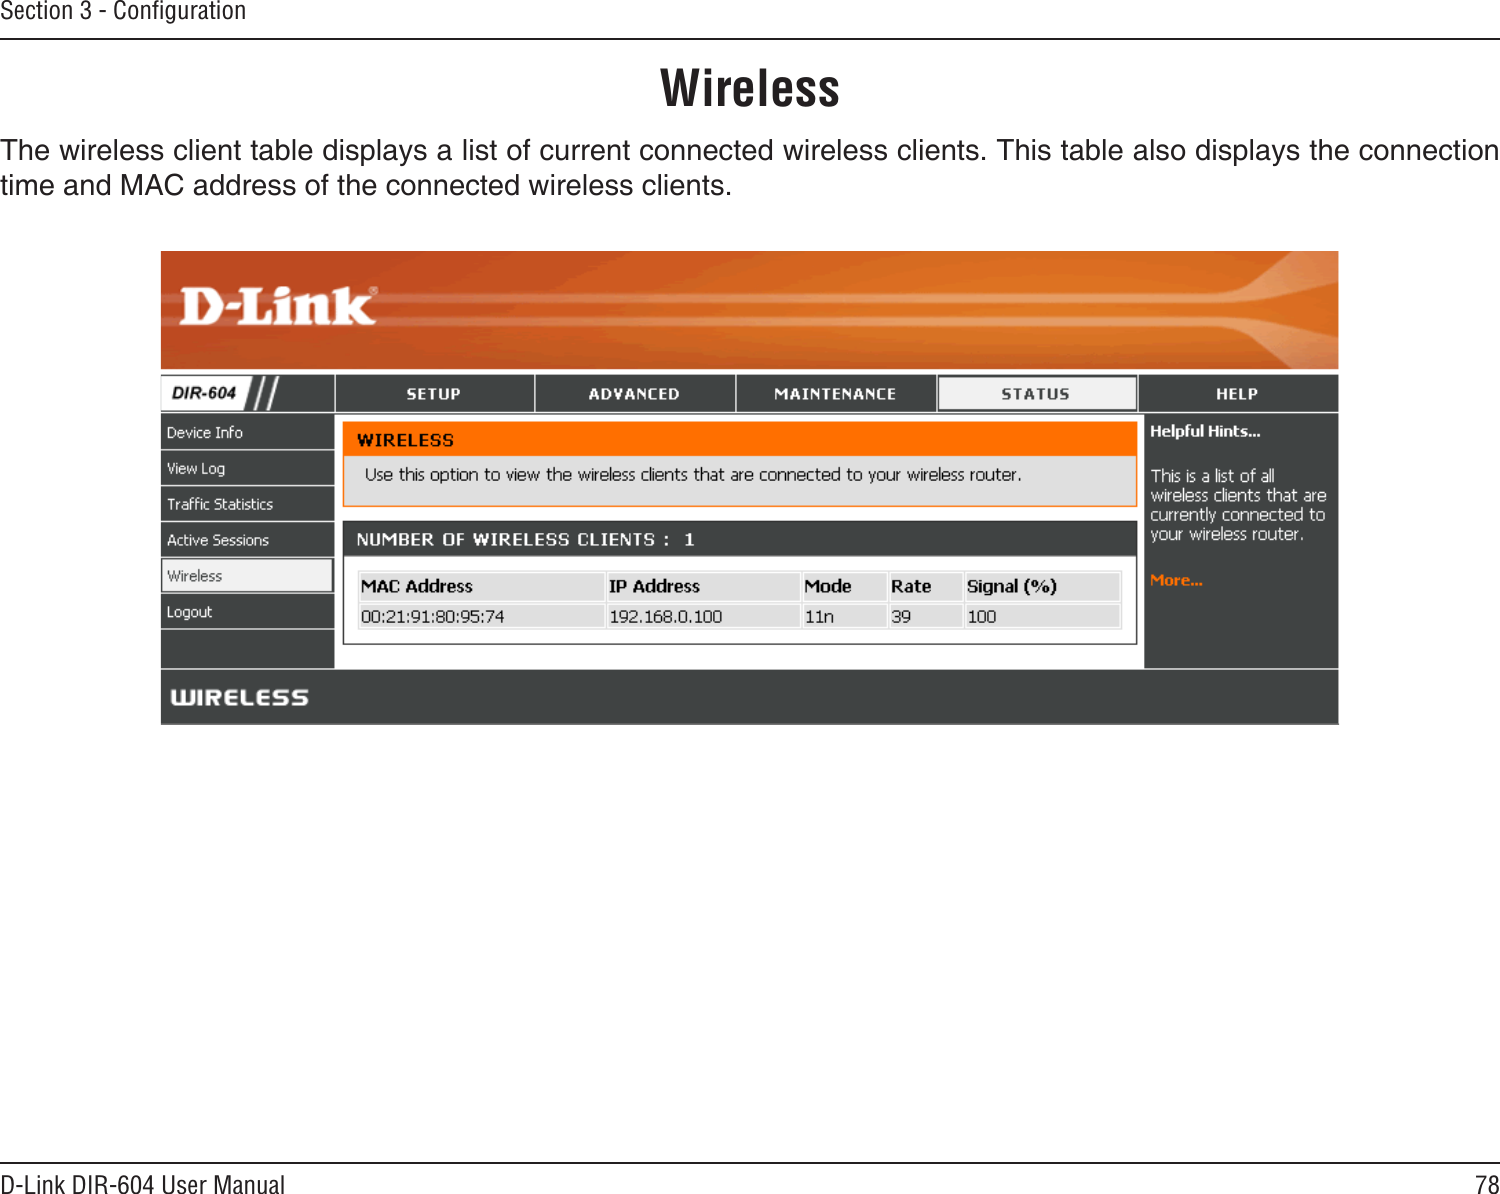 78D-Link DIR-604 User ManualSection 3 - ConﬁgurationThe wireless client table displays a list of current connected wireless clients. This table also displays the connection time and MAC address of the connected wireless clients.Wireless